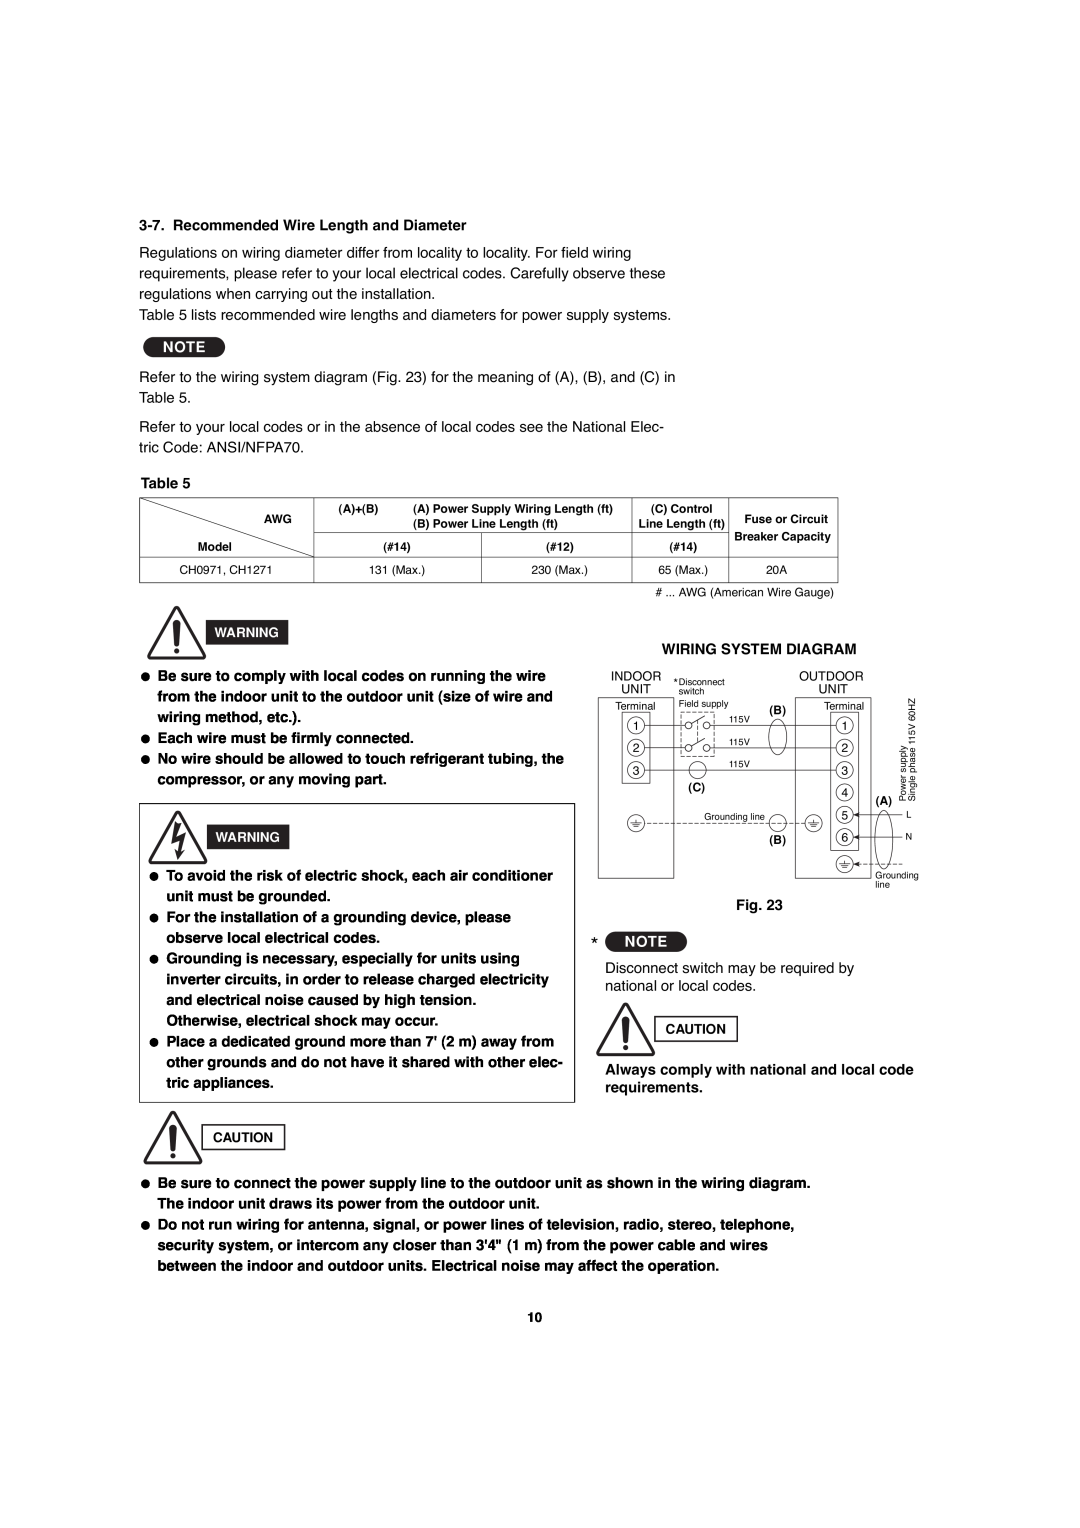 Sanyo CH0971, CH1271 service manual Recommended Wire Length and Diameter 